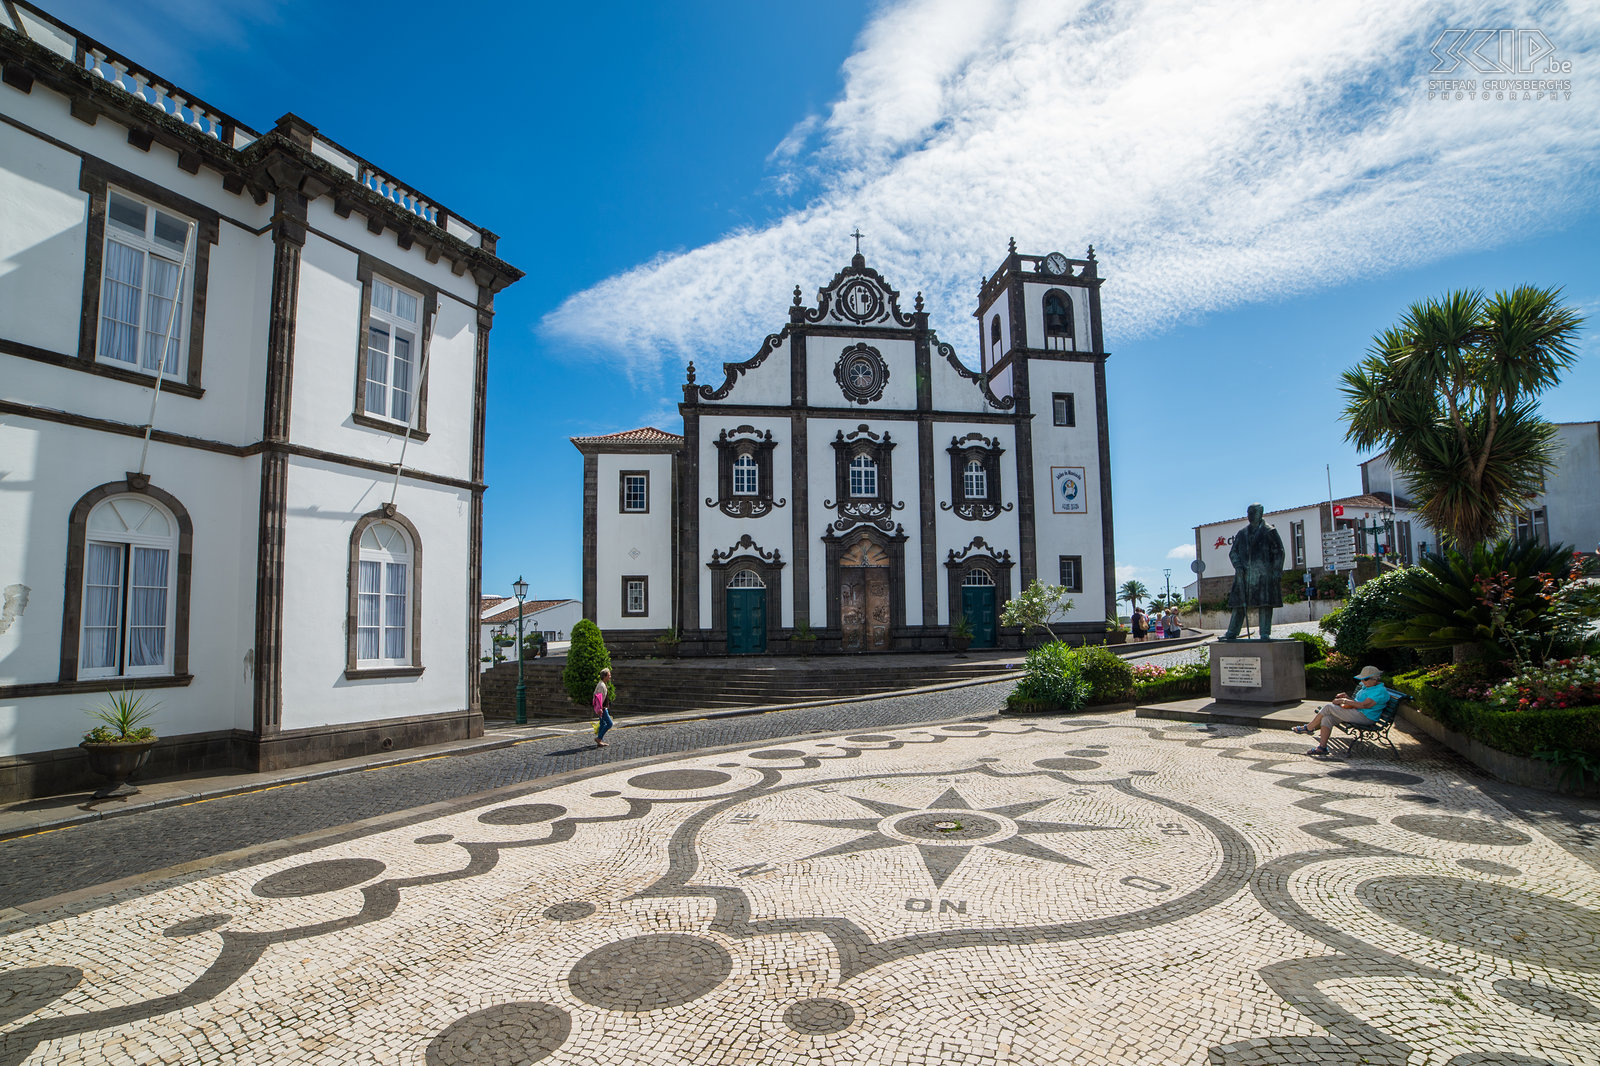 Nordeste The main square and church of the village of Nordeste in the northeastern part of the island of São Miguel. Stefan Cruysberghs